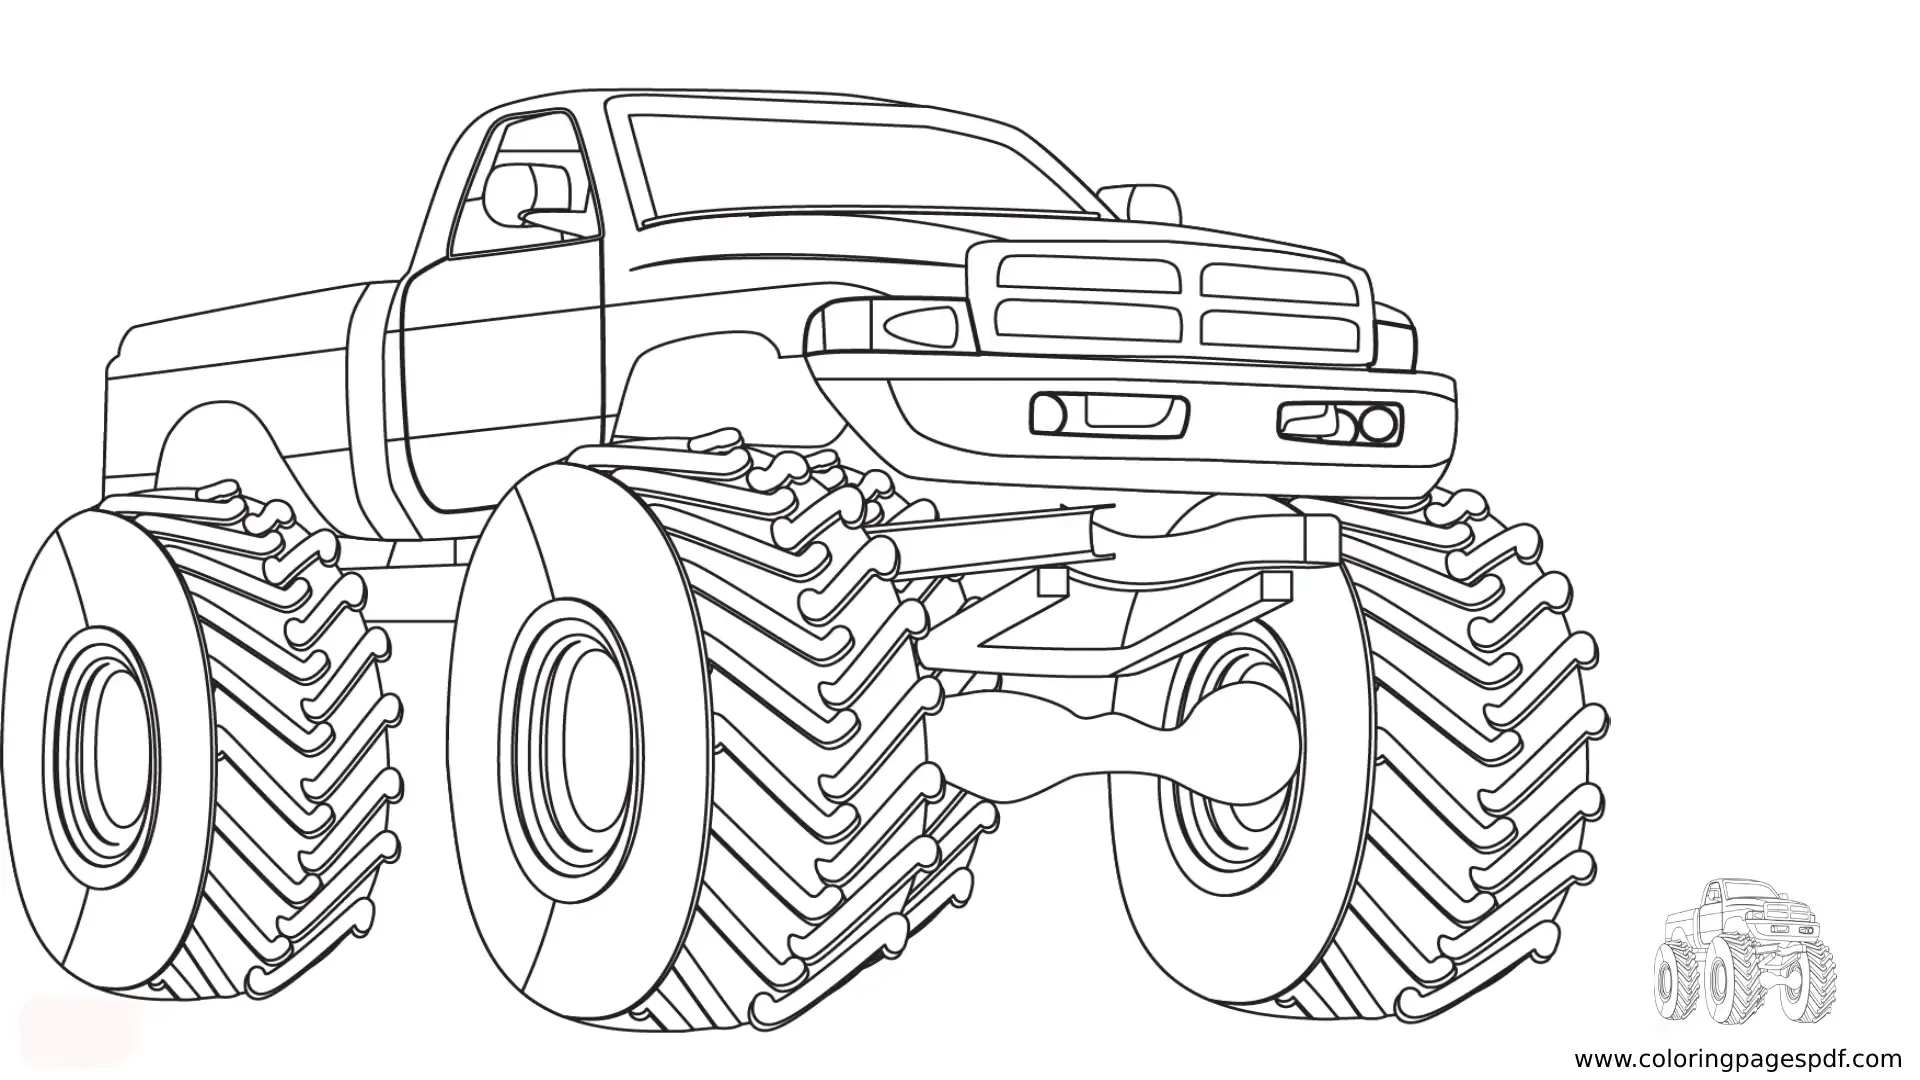 Coloring Pages Of A Big Monster Truck